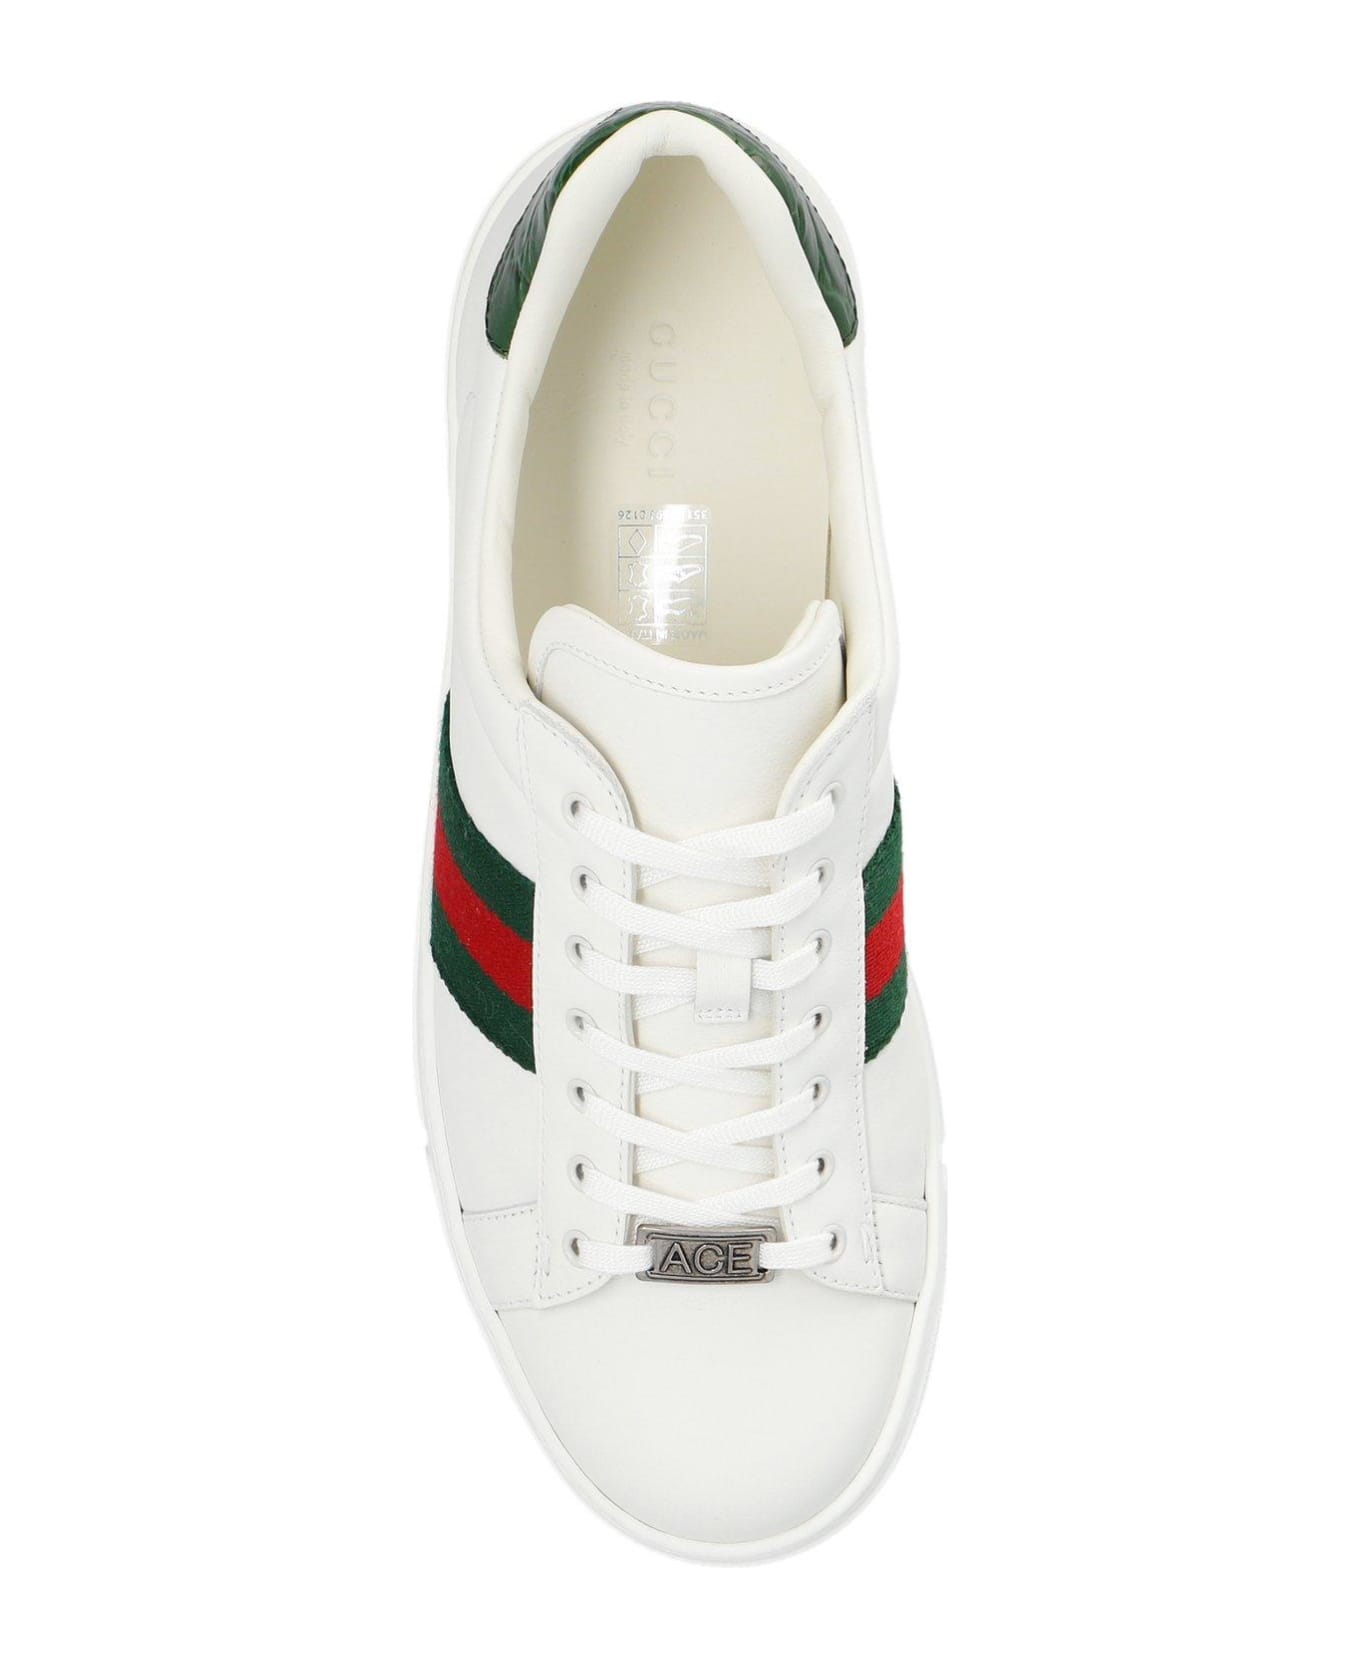 Gucci Ace Low-top Sneakers - White スニーカー